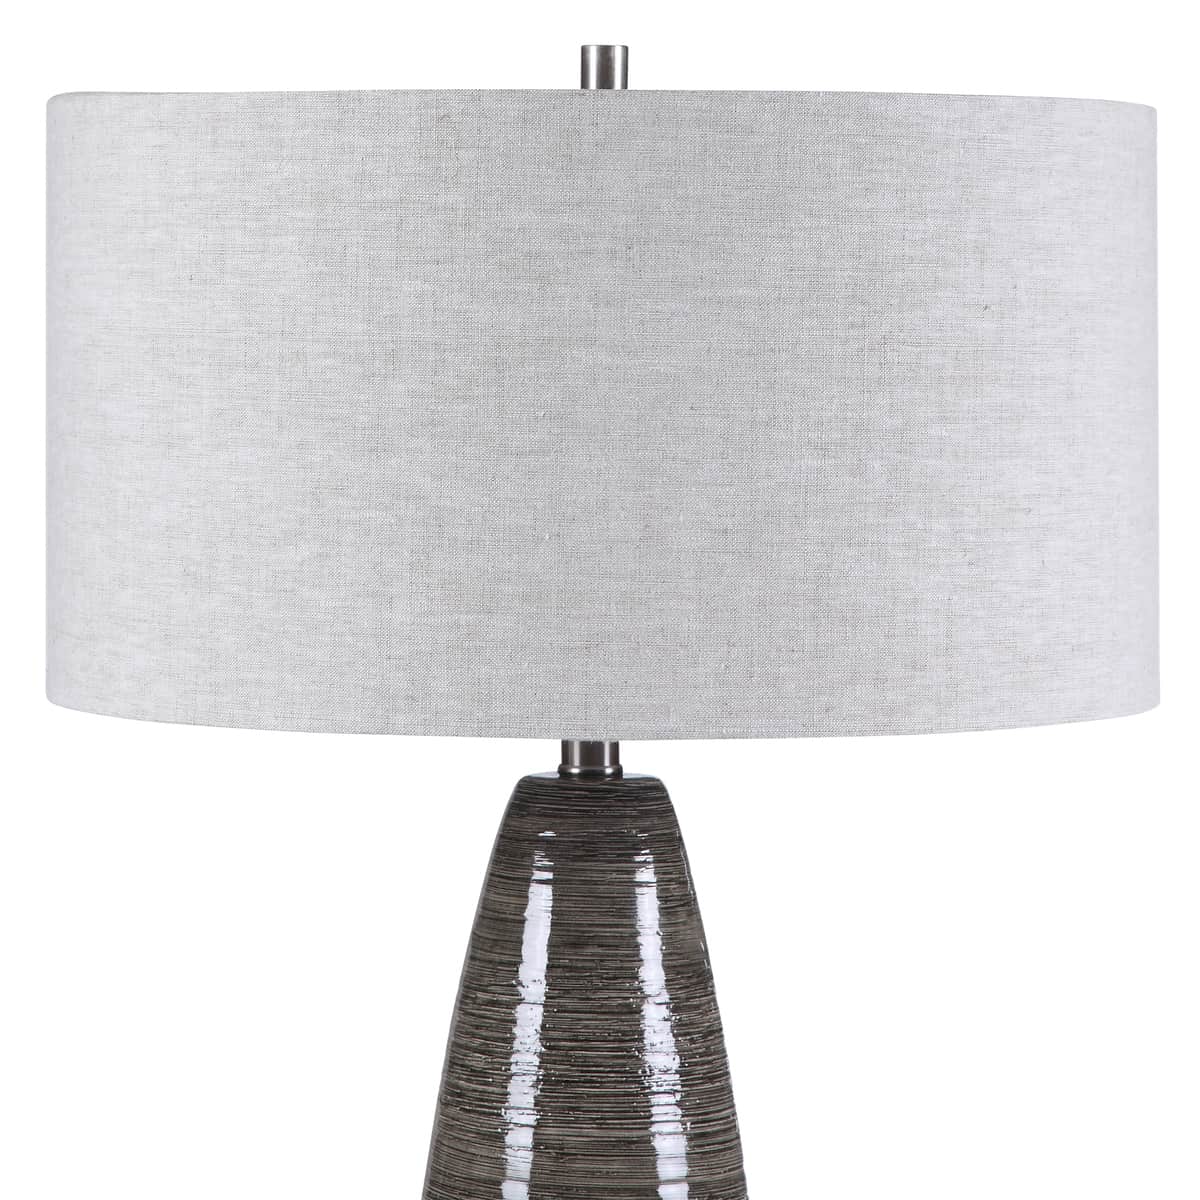 Uttermost Cosmo Charcoal Table Lamp Charcoal Table Lamp